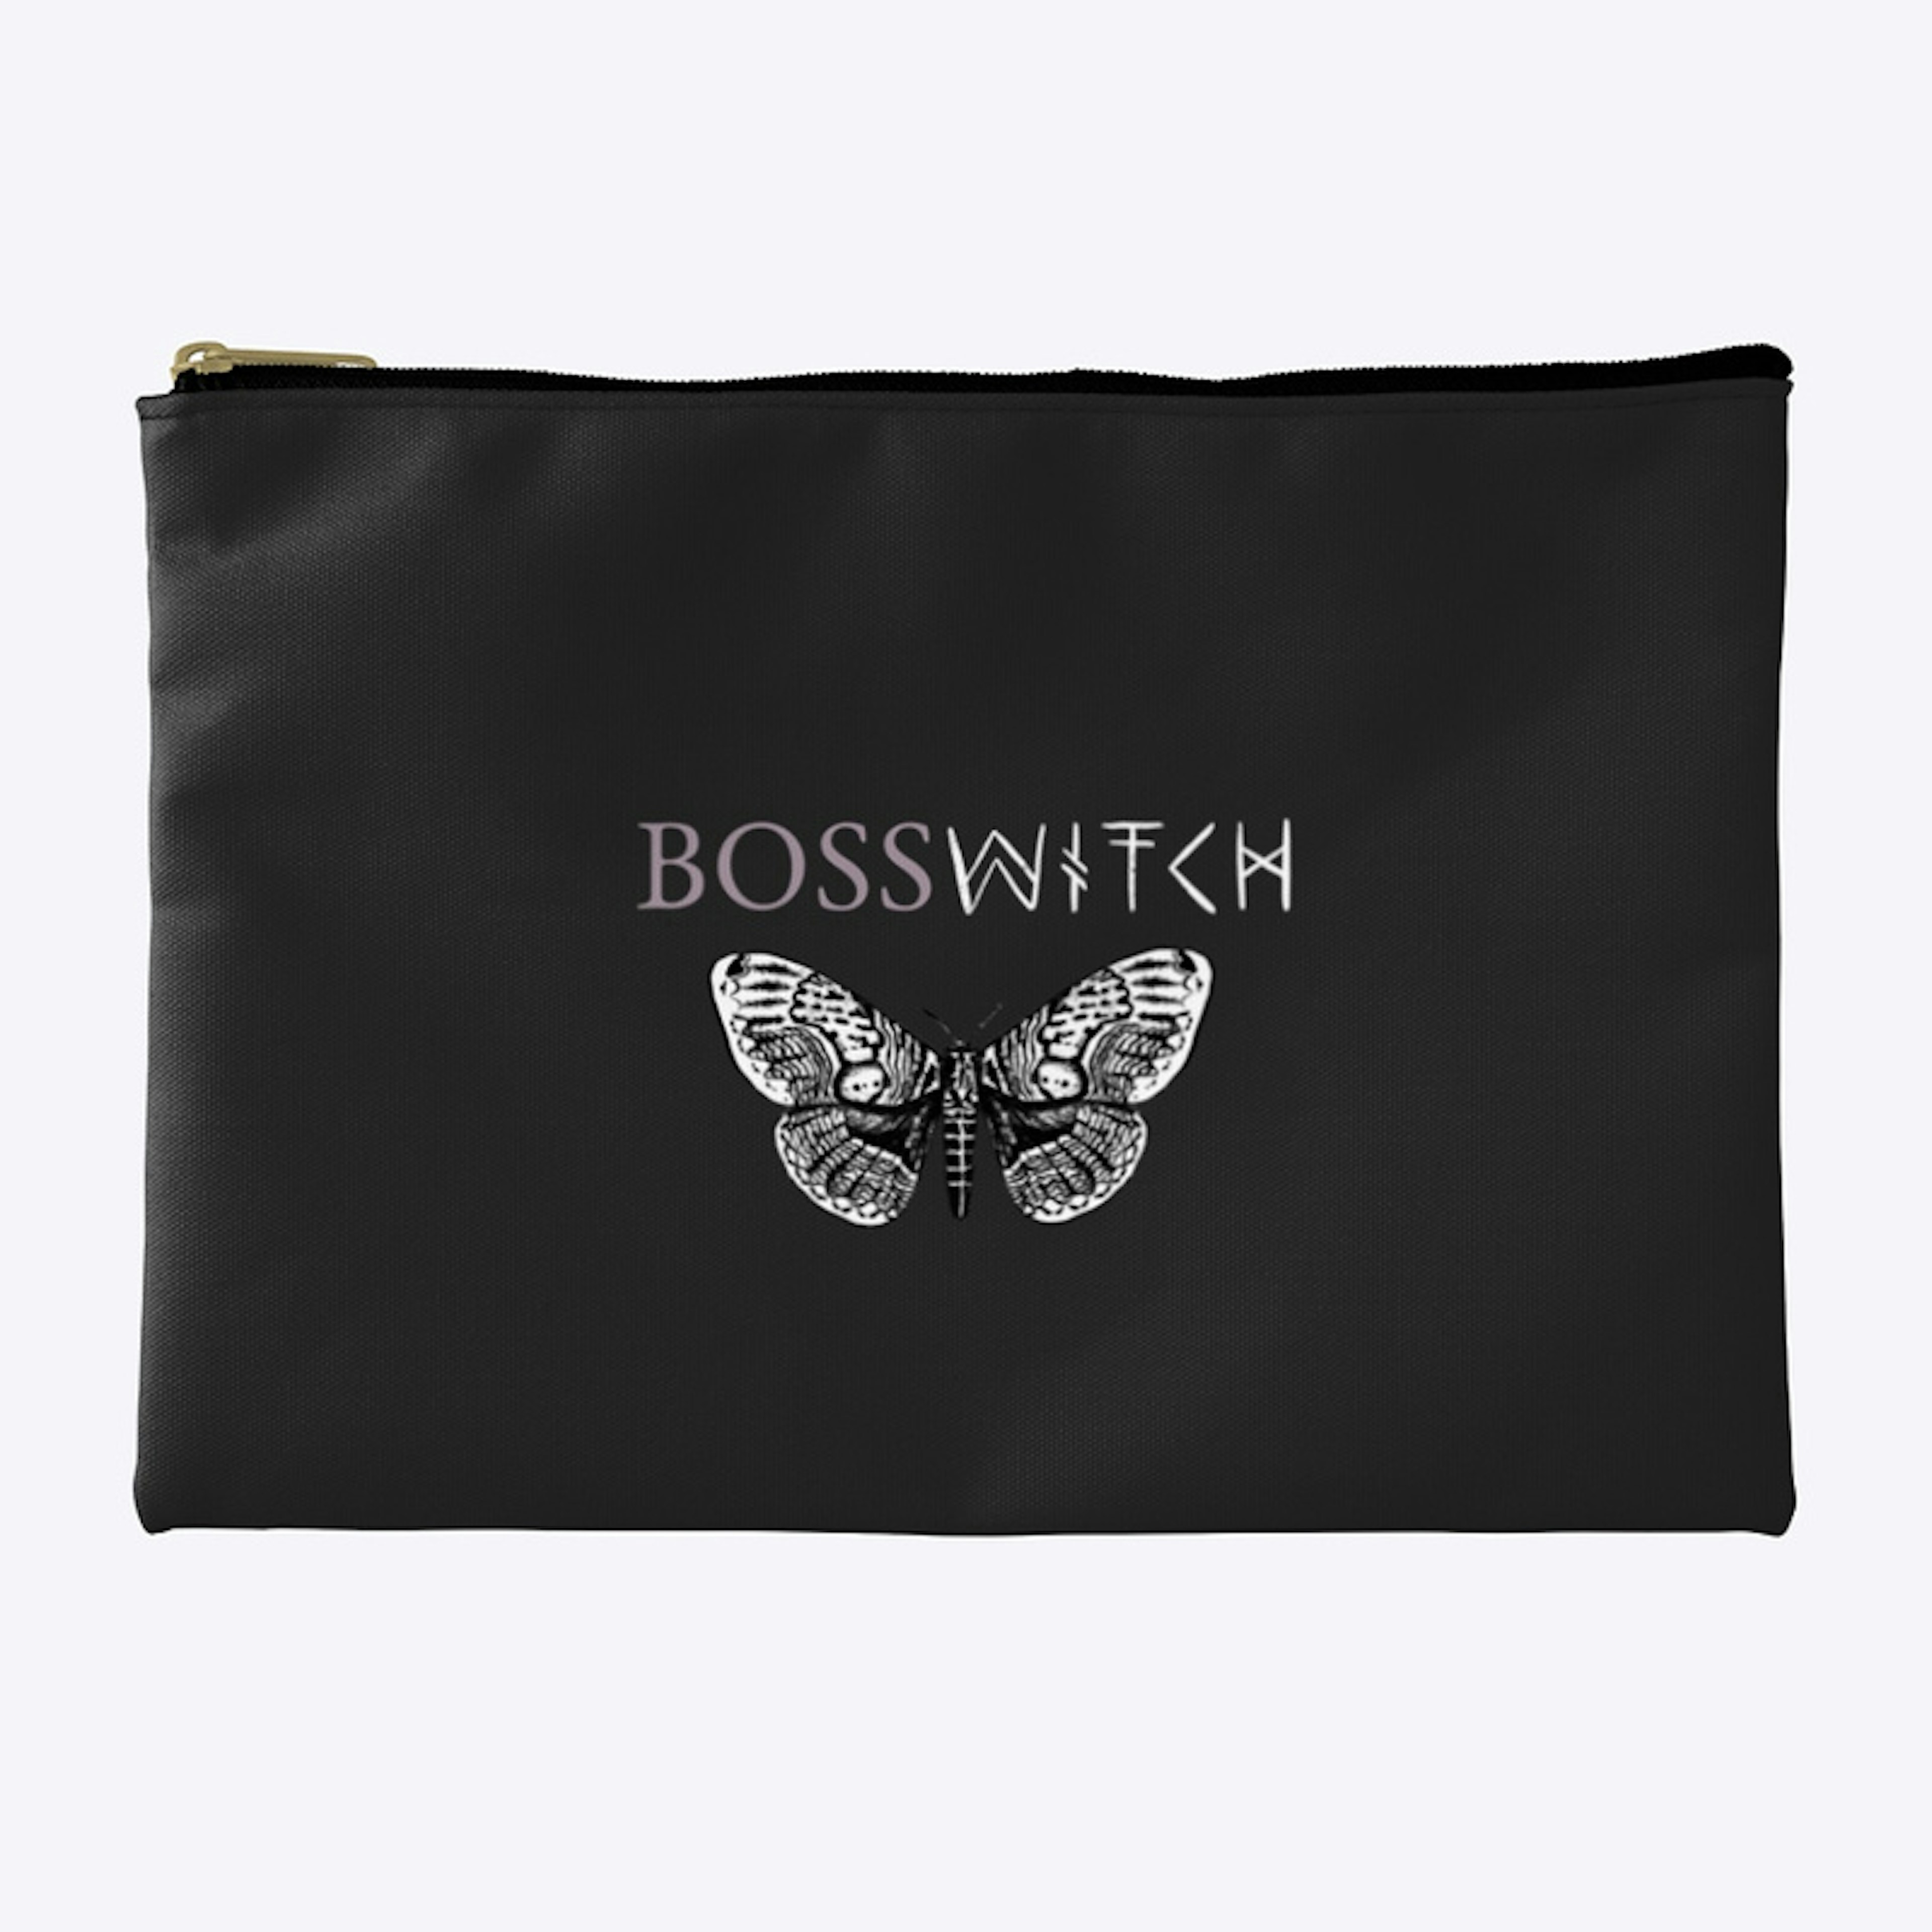 Signature BossWitch Pouch